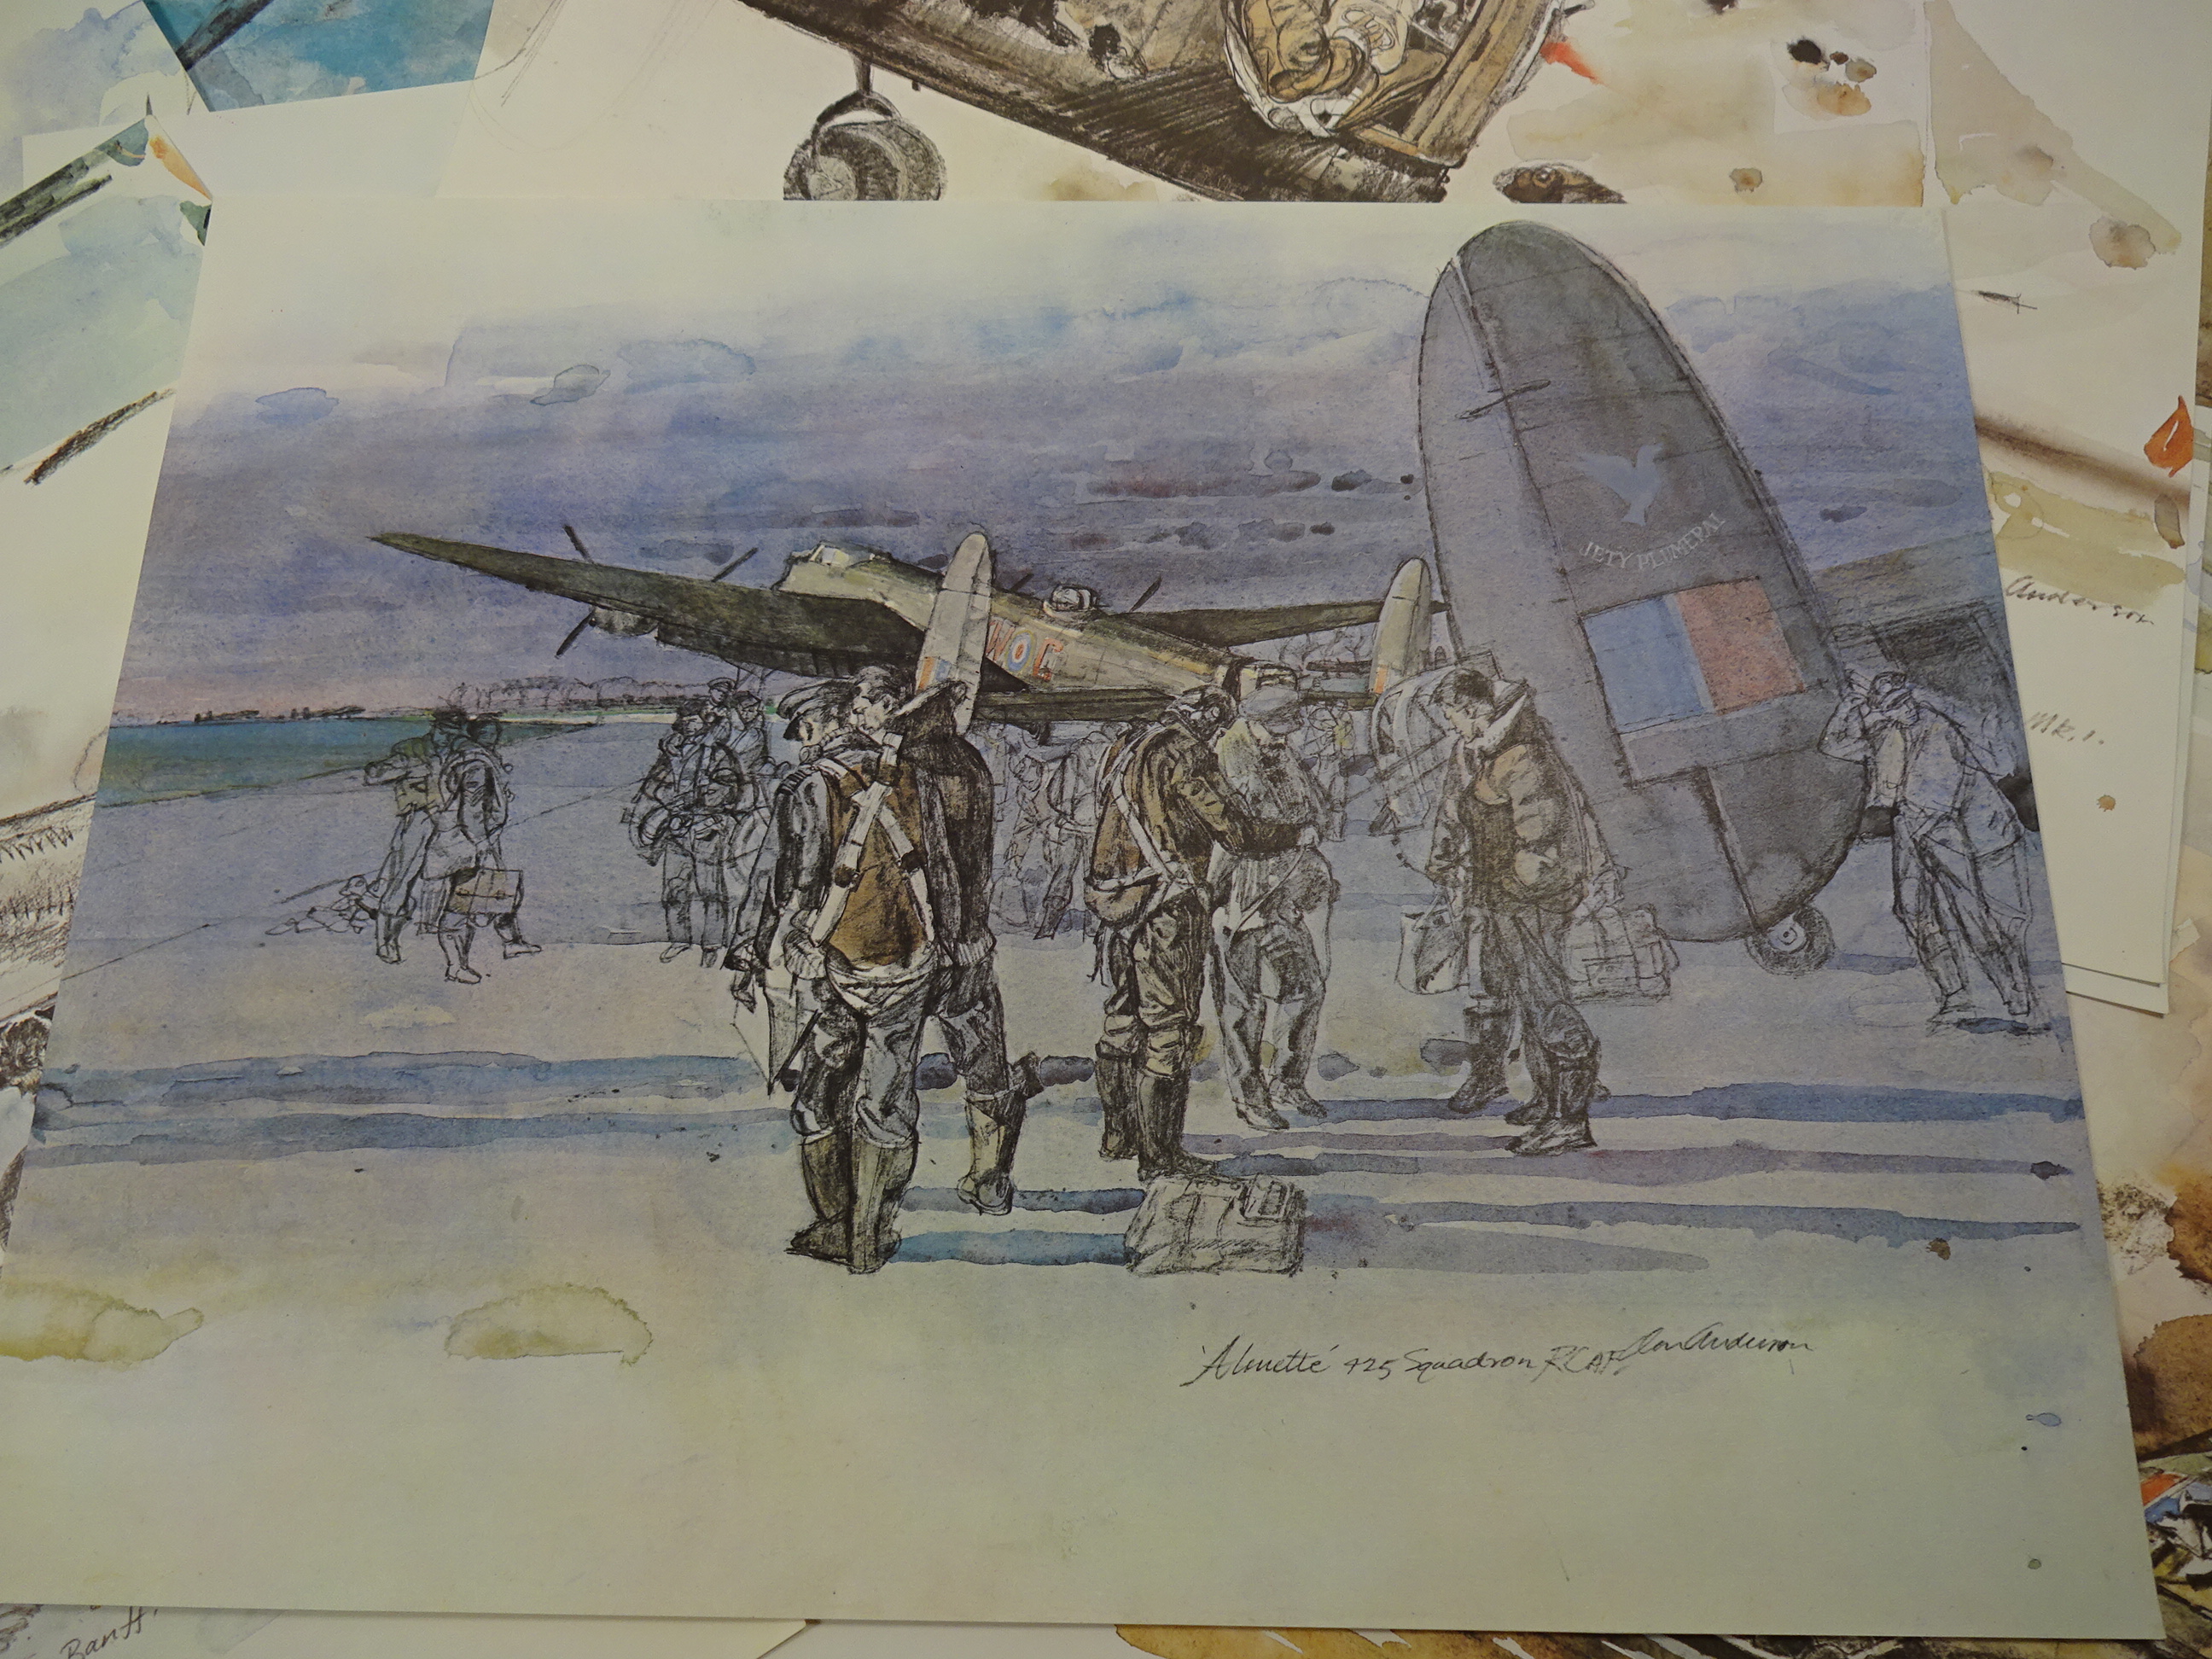 RCAF THE WAR YEARS WW2 PORTFOLIO COMMEMORATING 40TH ANNIVERSARY OF BATTLE OF BRITAIN, - Image 3 of 8